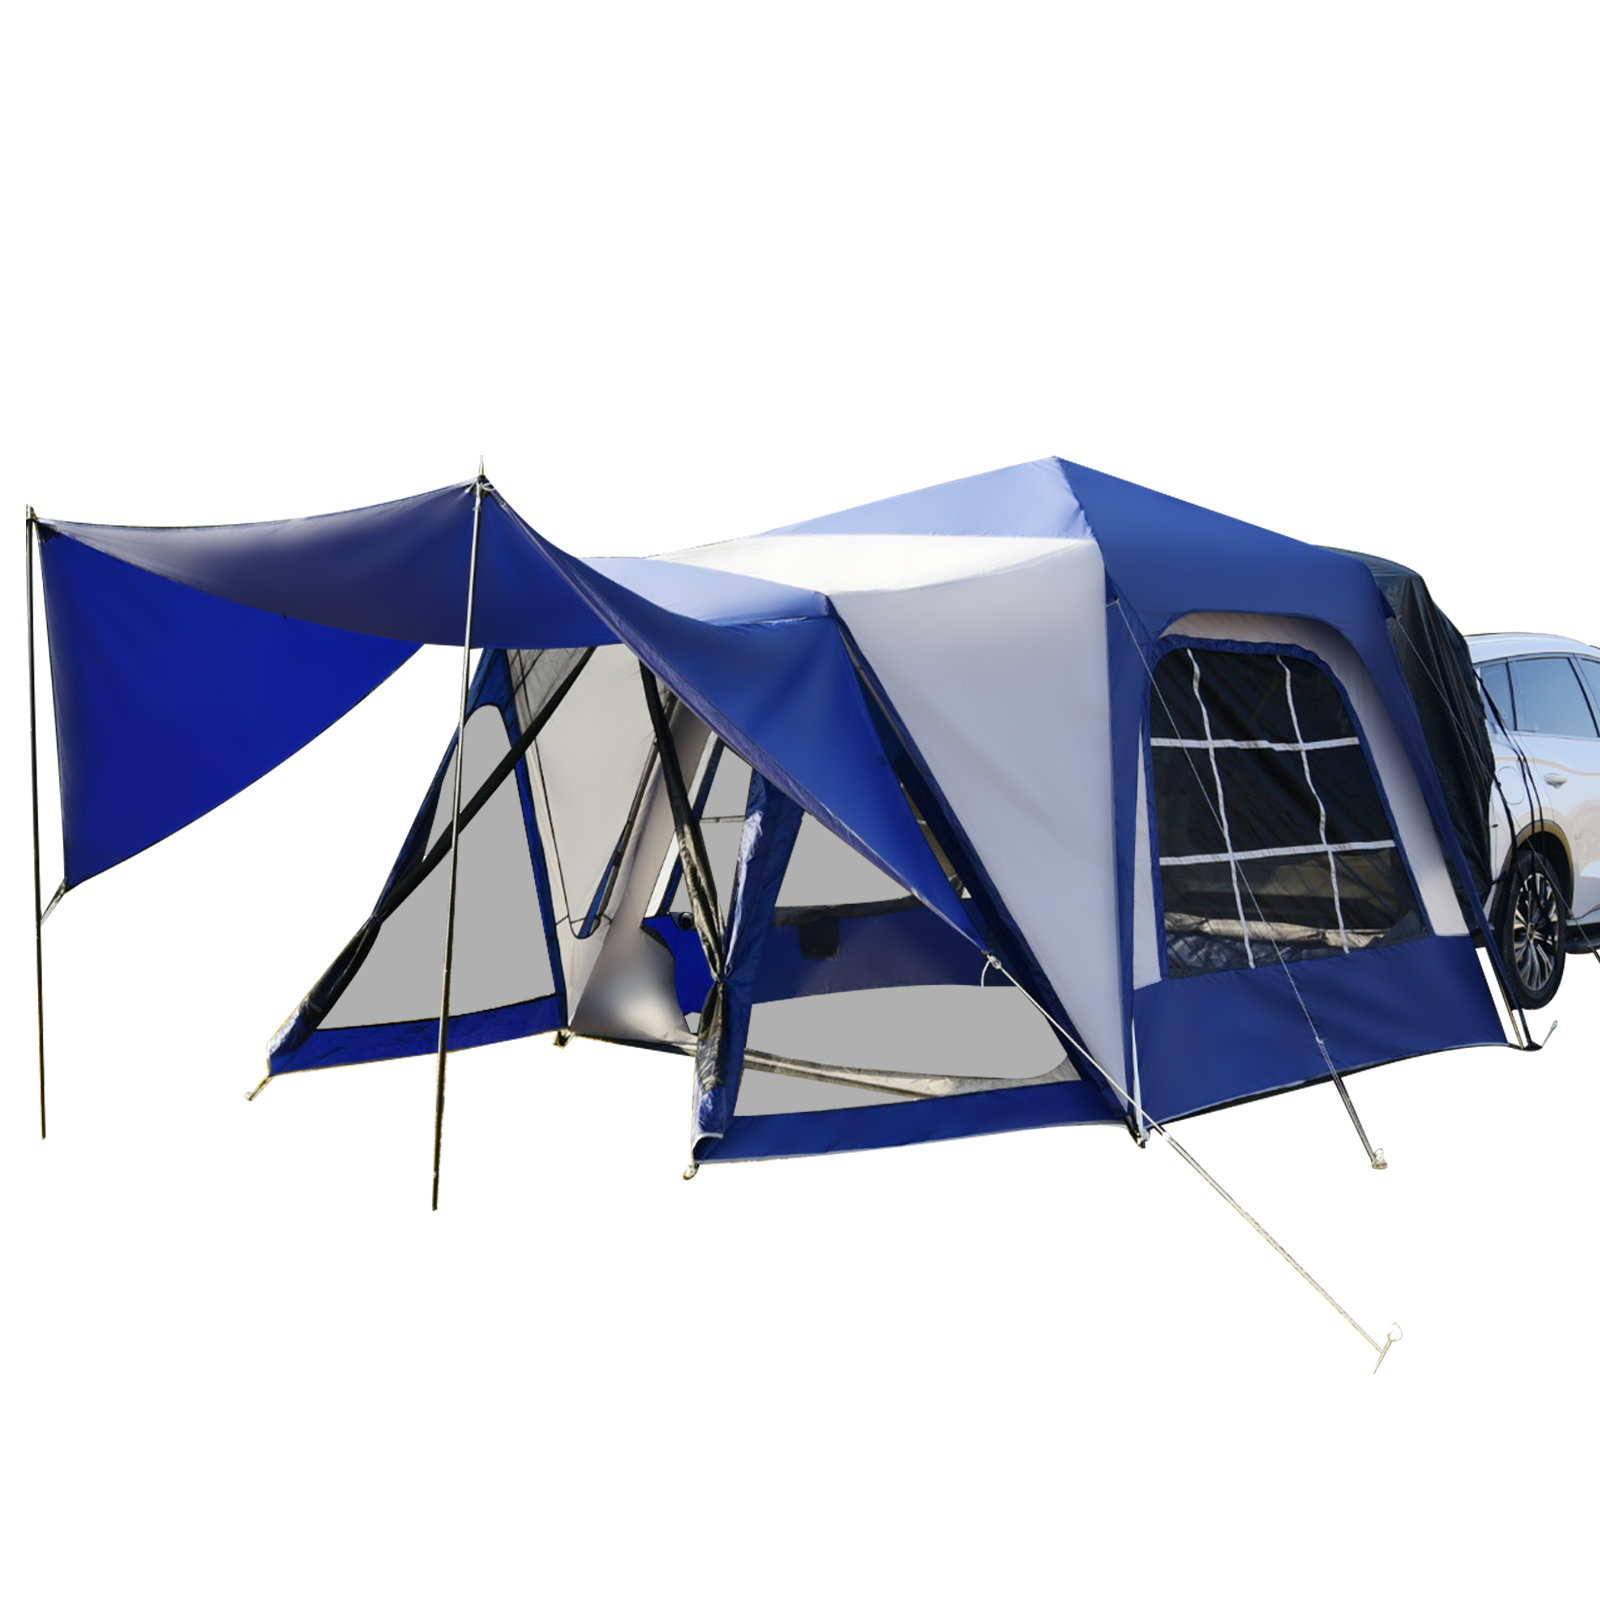 Universal SUV Family Camping Tent Up to 4-6 Person Sleeping